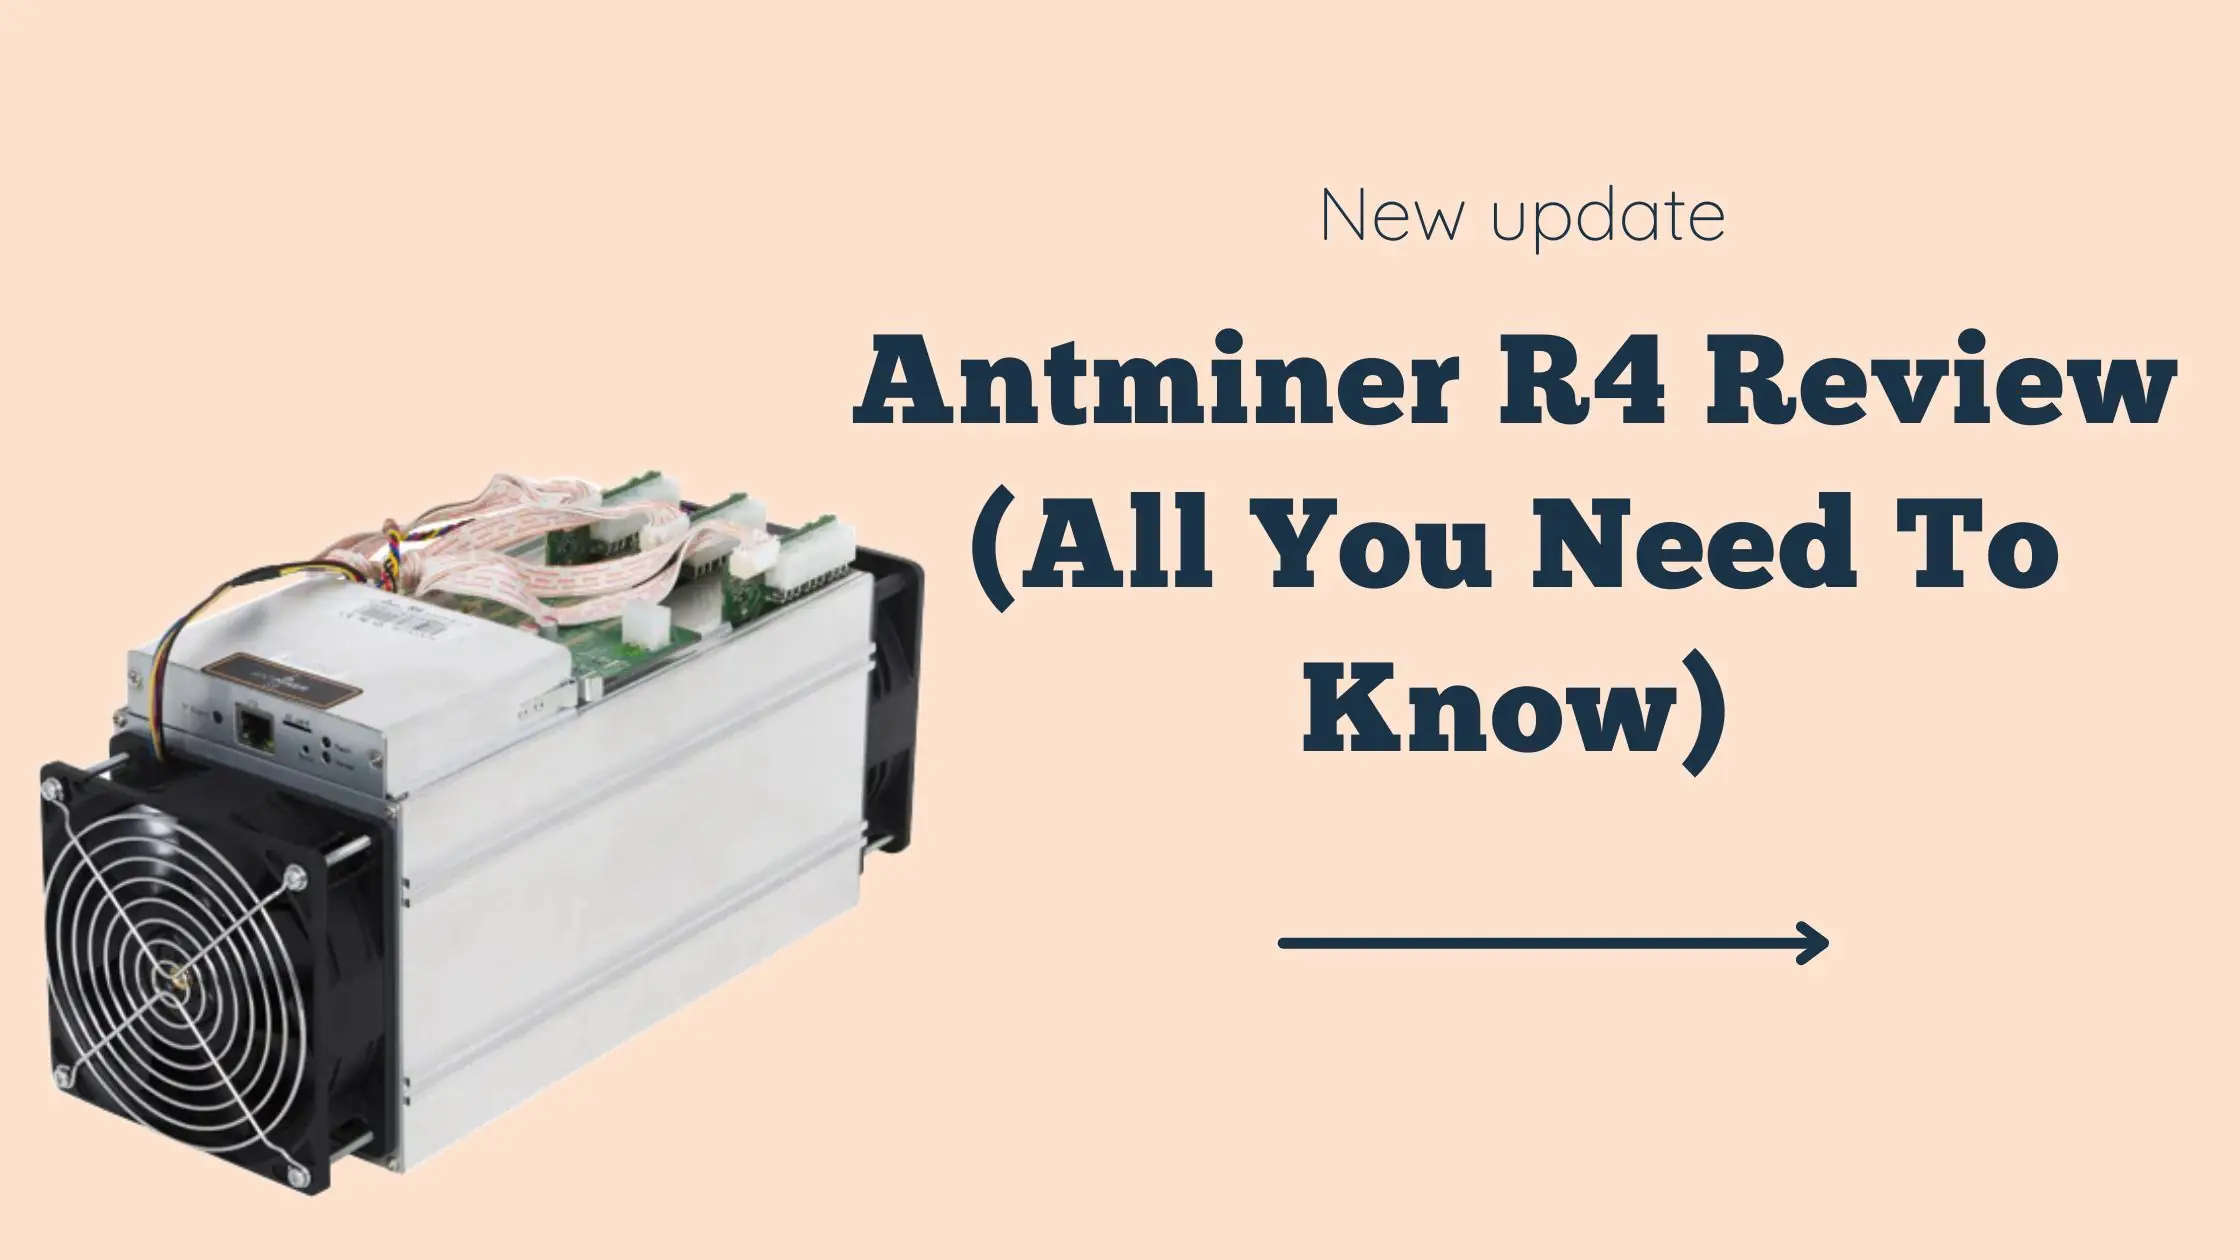 Antminer R4 Review (All You Need to Know)